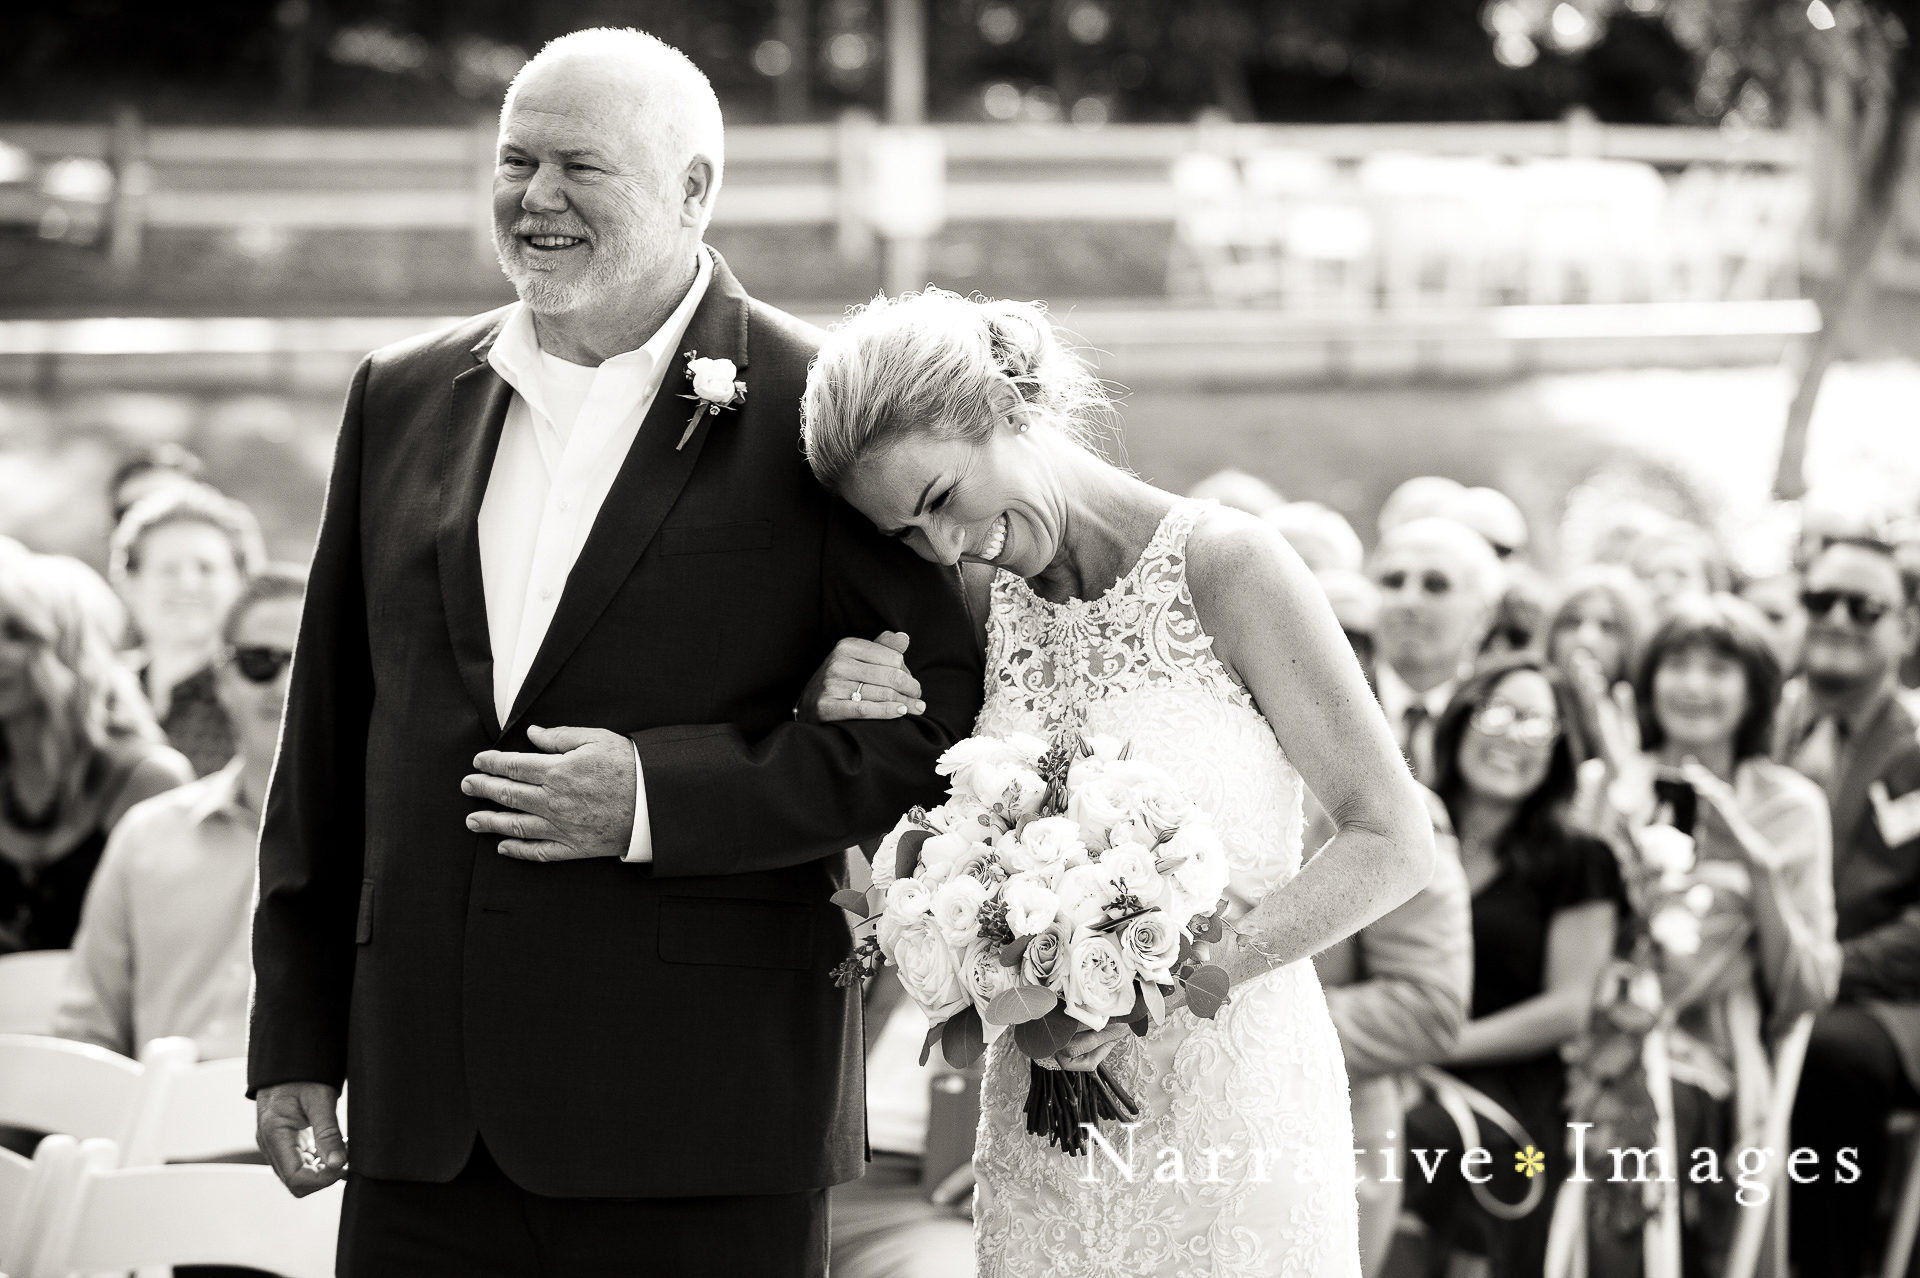 Emotional bride laughs as she walks down the aisle with her father